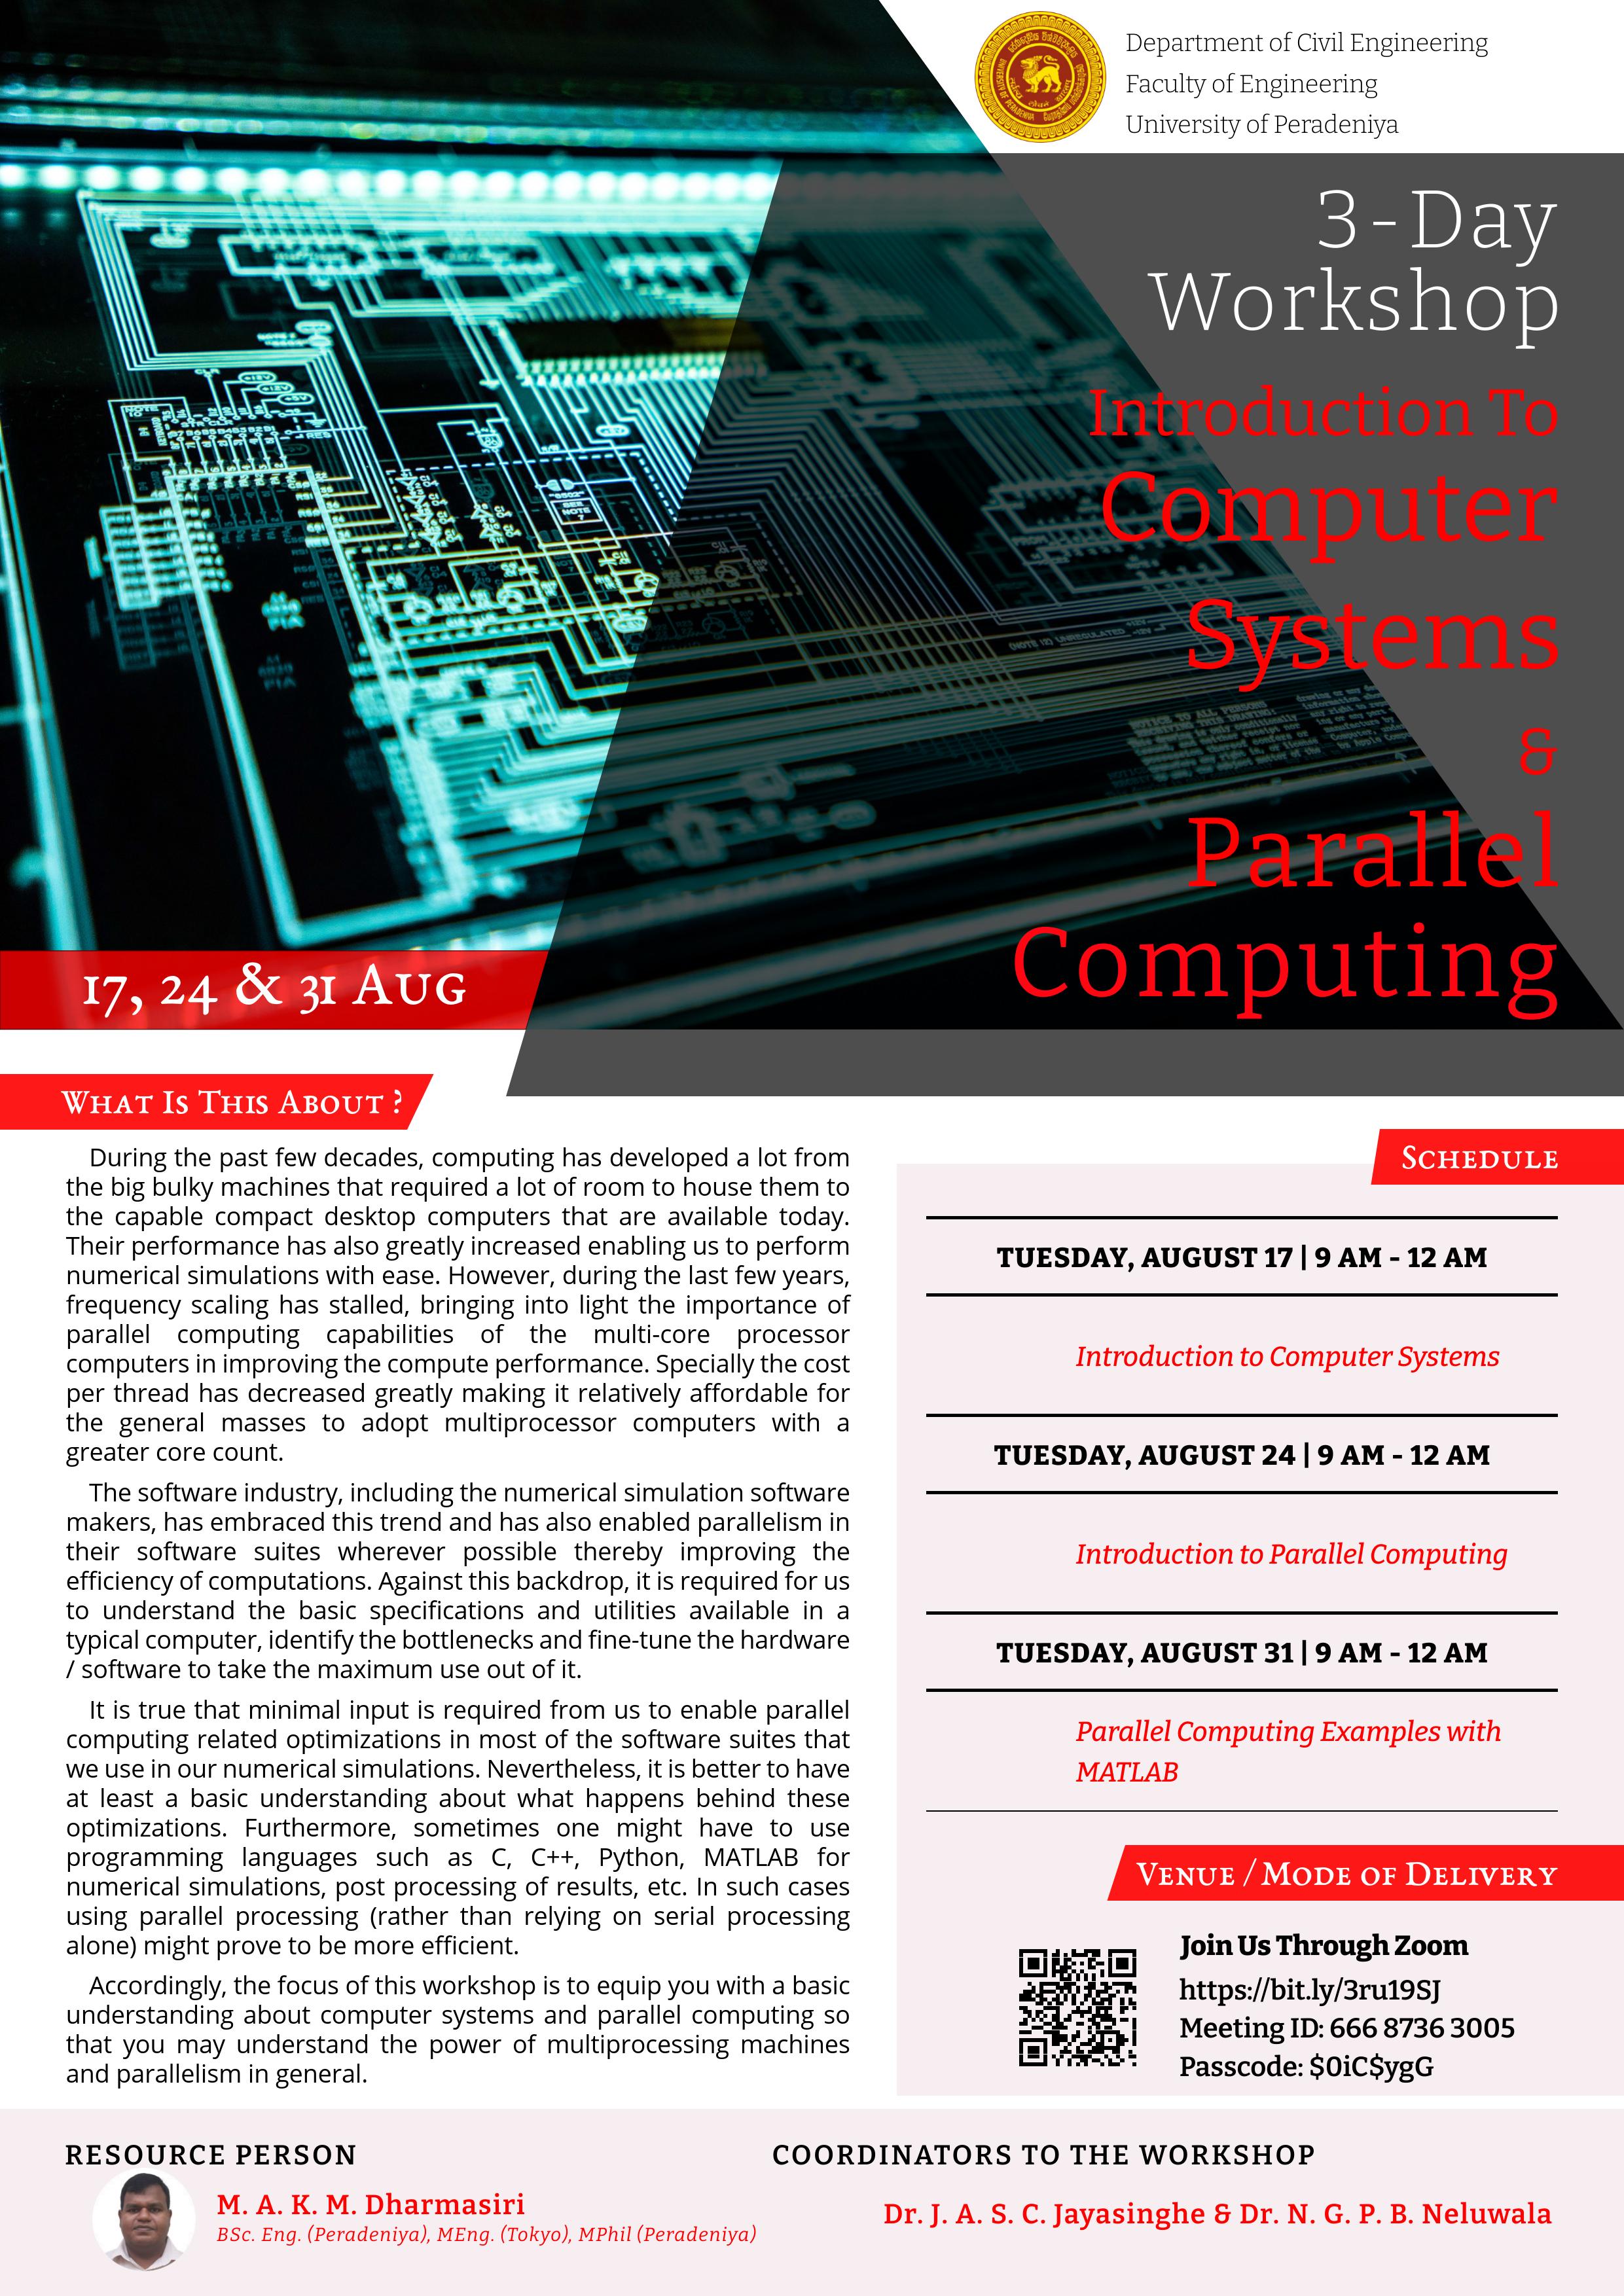 Workshop: Introduction to Computer Systems and Parallel 
Computing